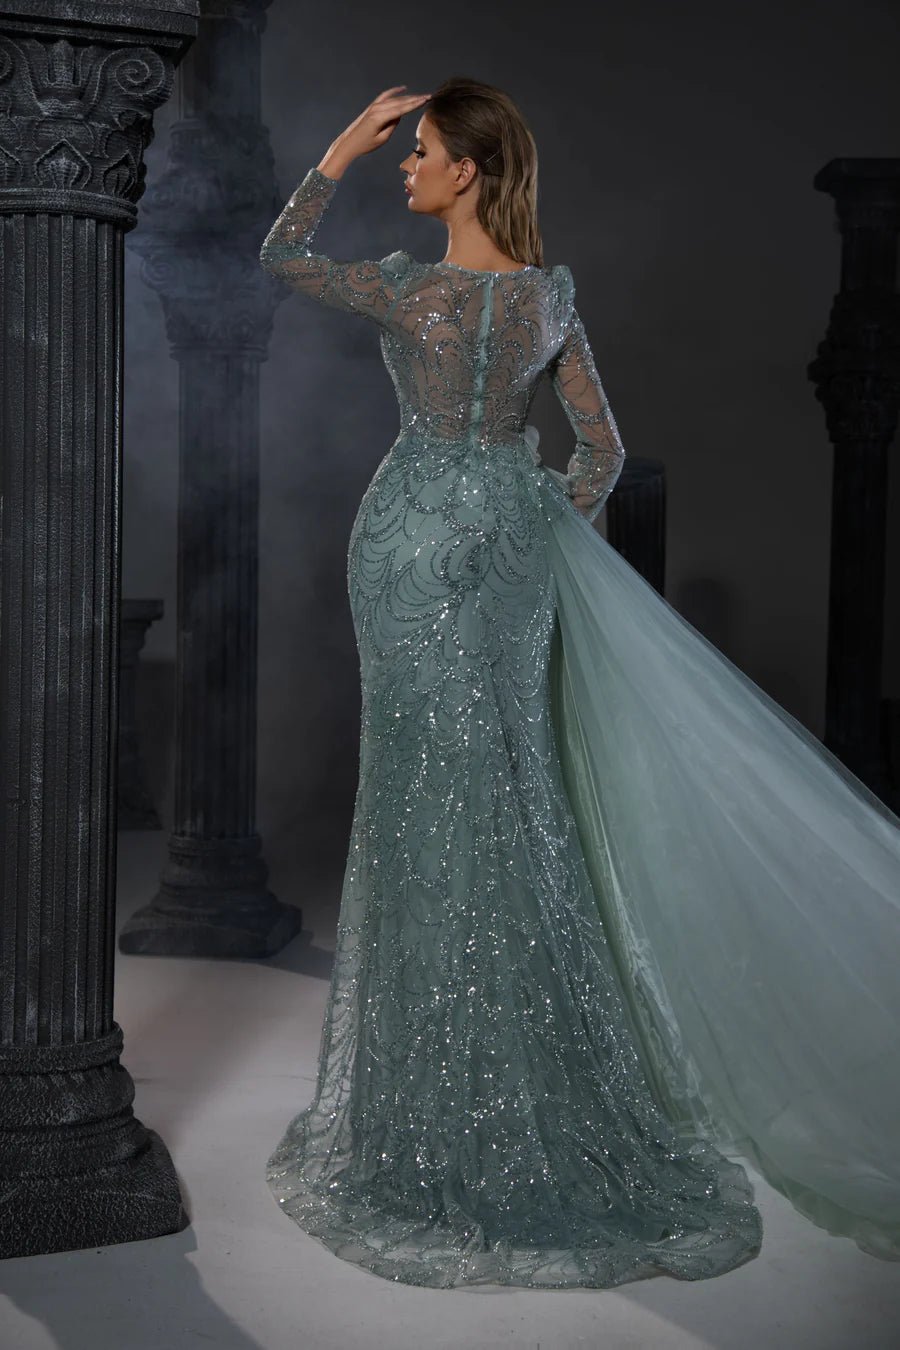 Gothic Green Sequin Evening Gown with Long Sheer Sleeves and Tulle Accent - Designer Sequin Gown and Glitter Dress Plus Size - WonderlandByLilian